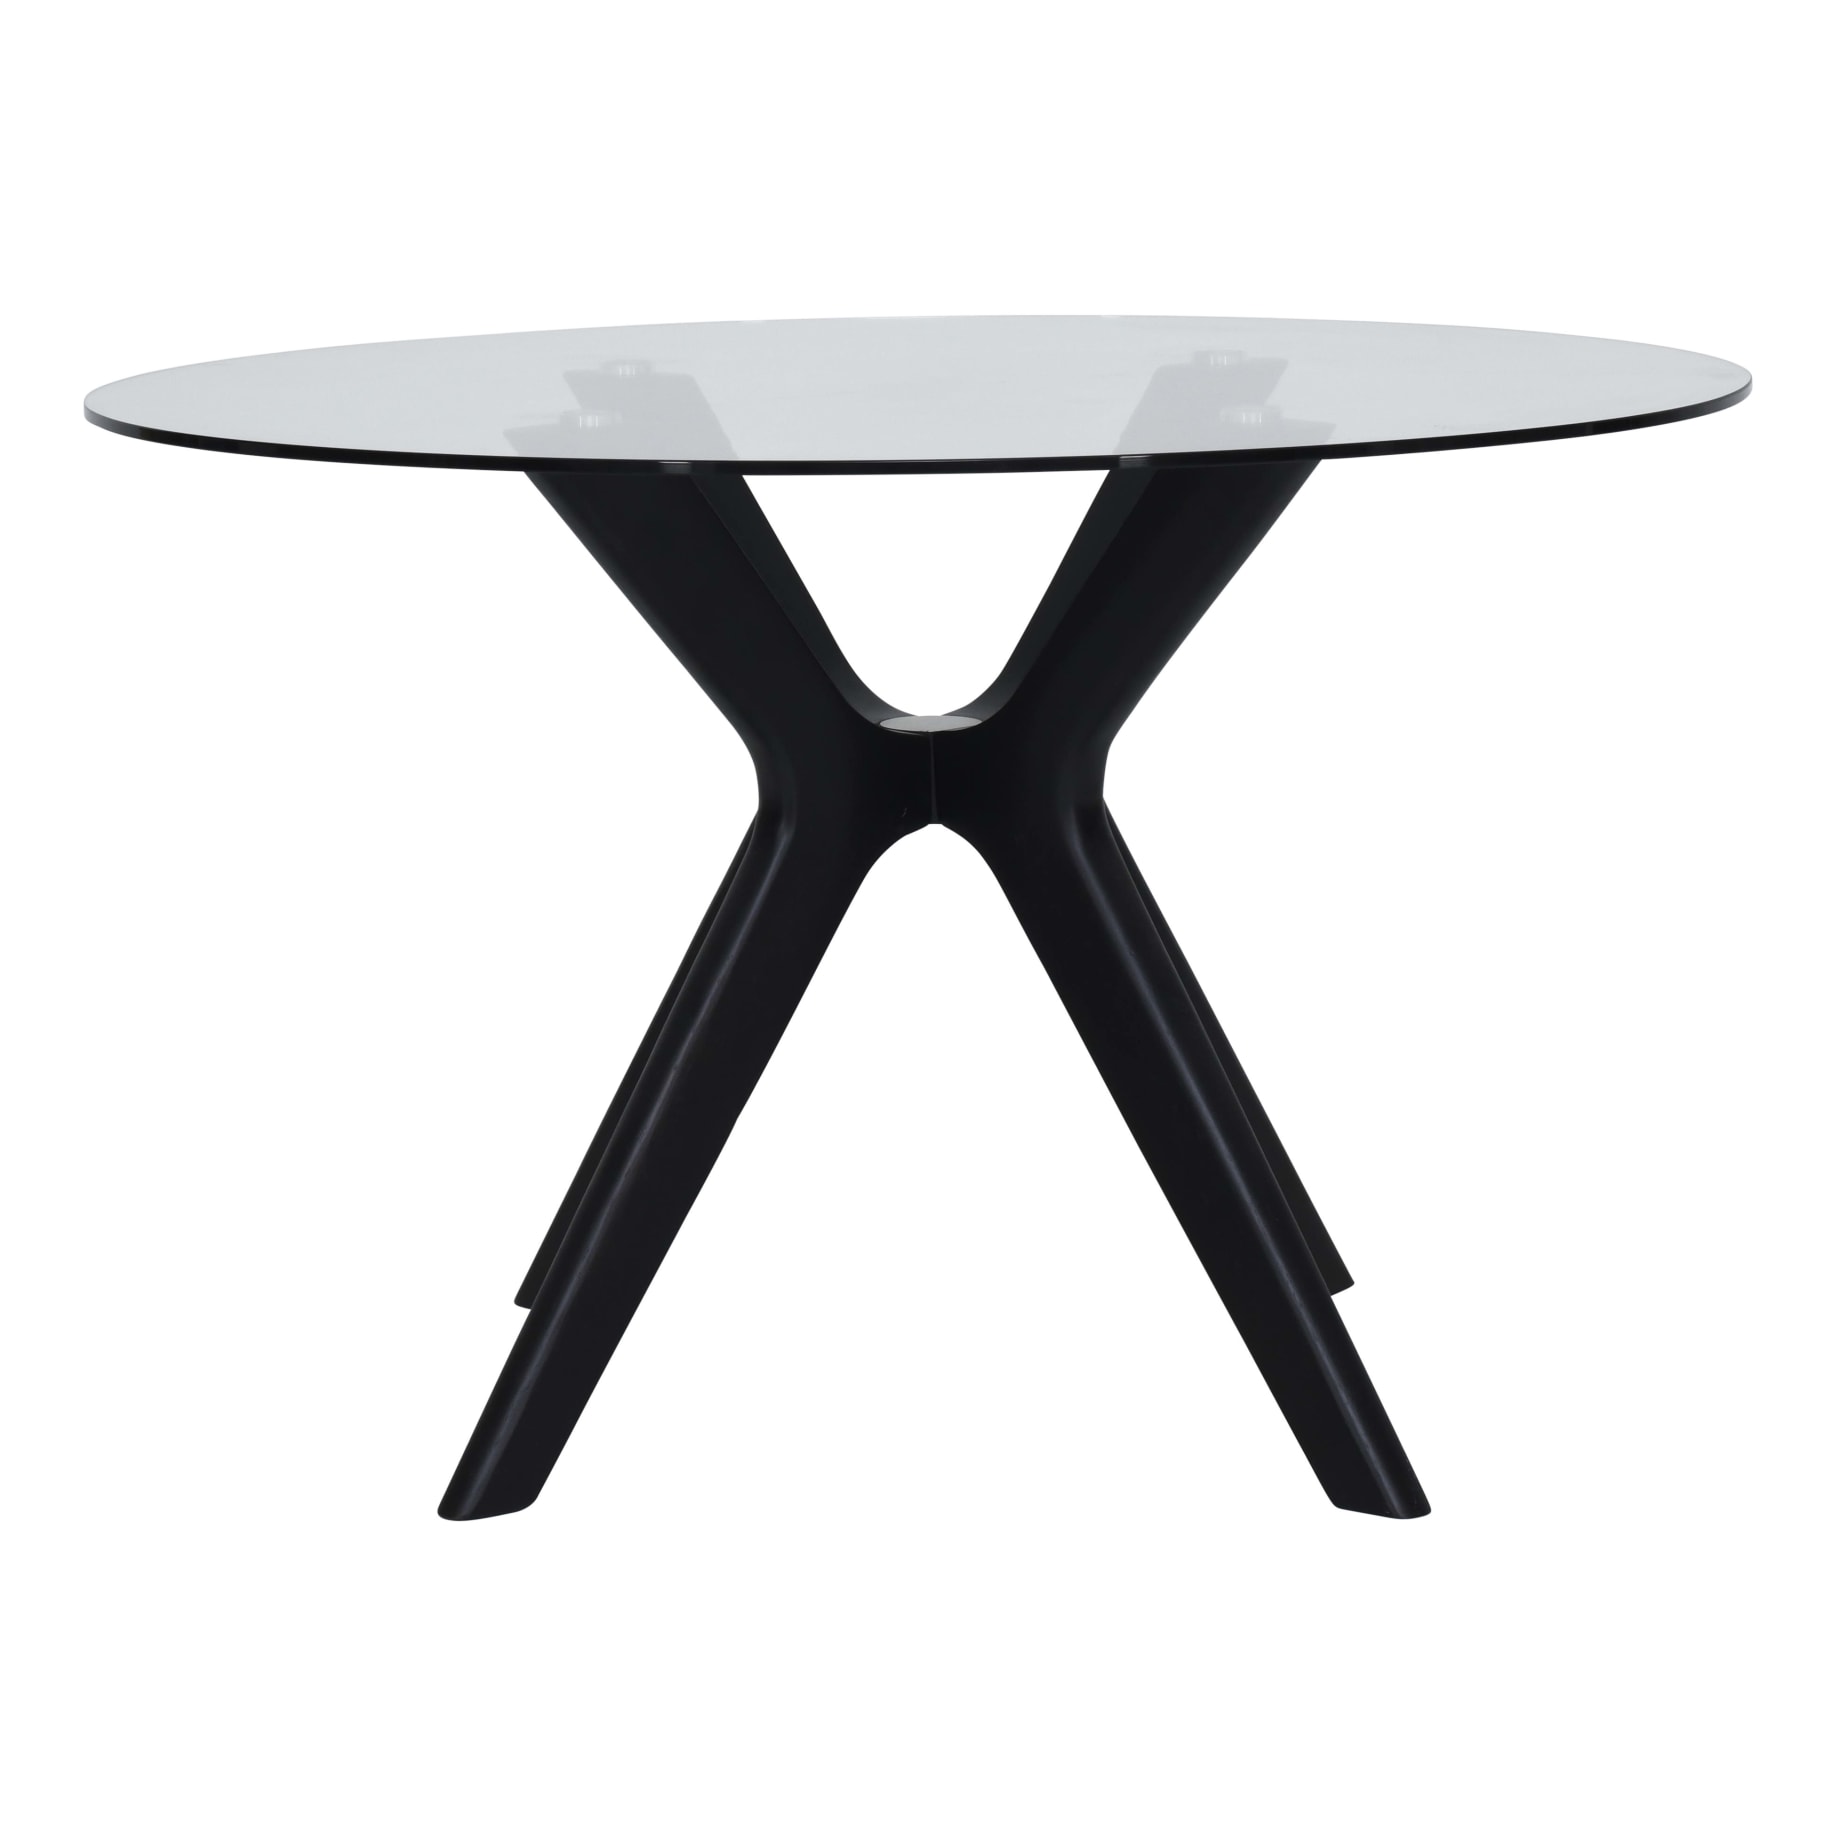 Padma Round Dining Table 100cm in Glass / Black